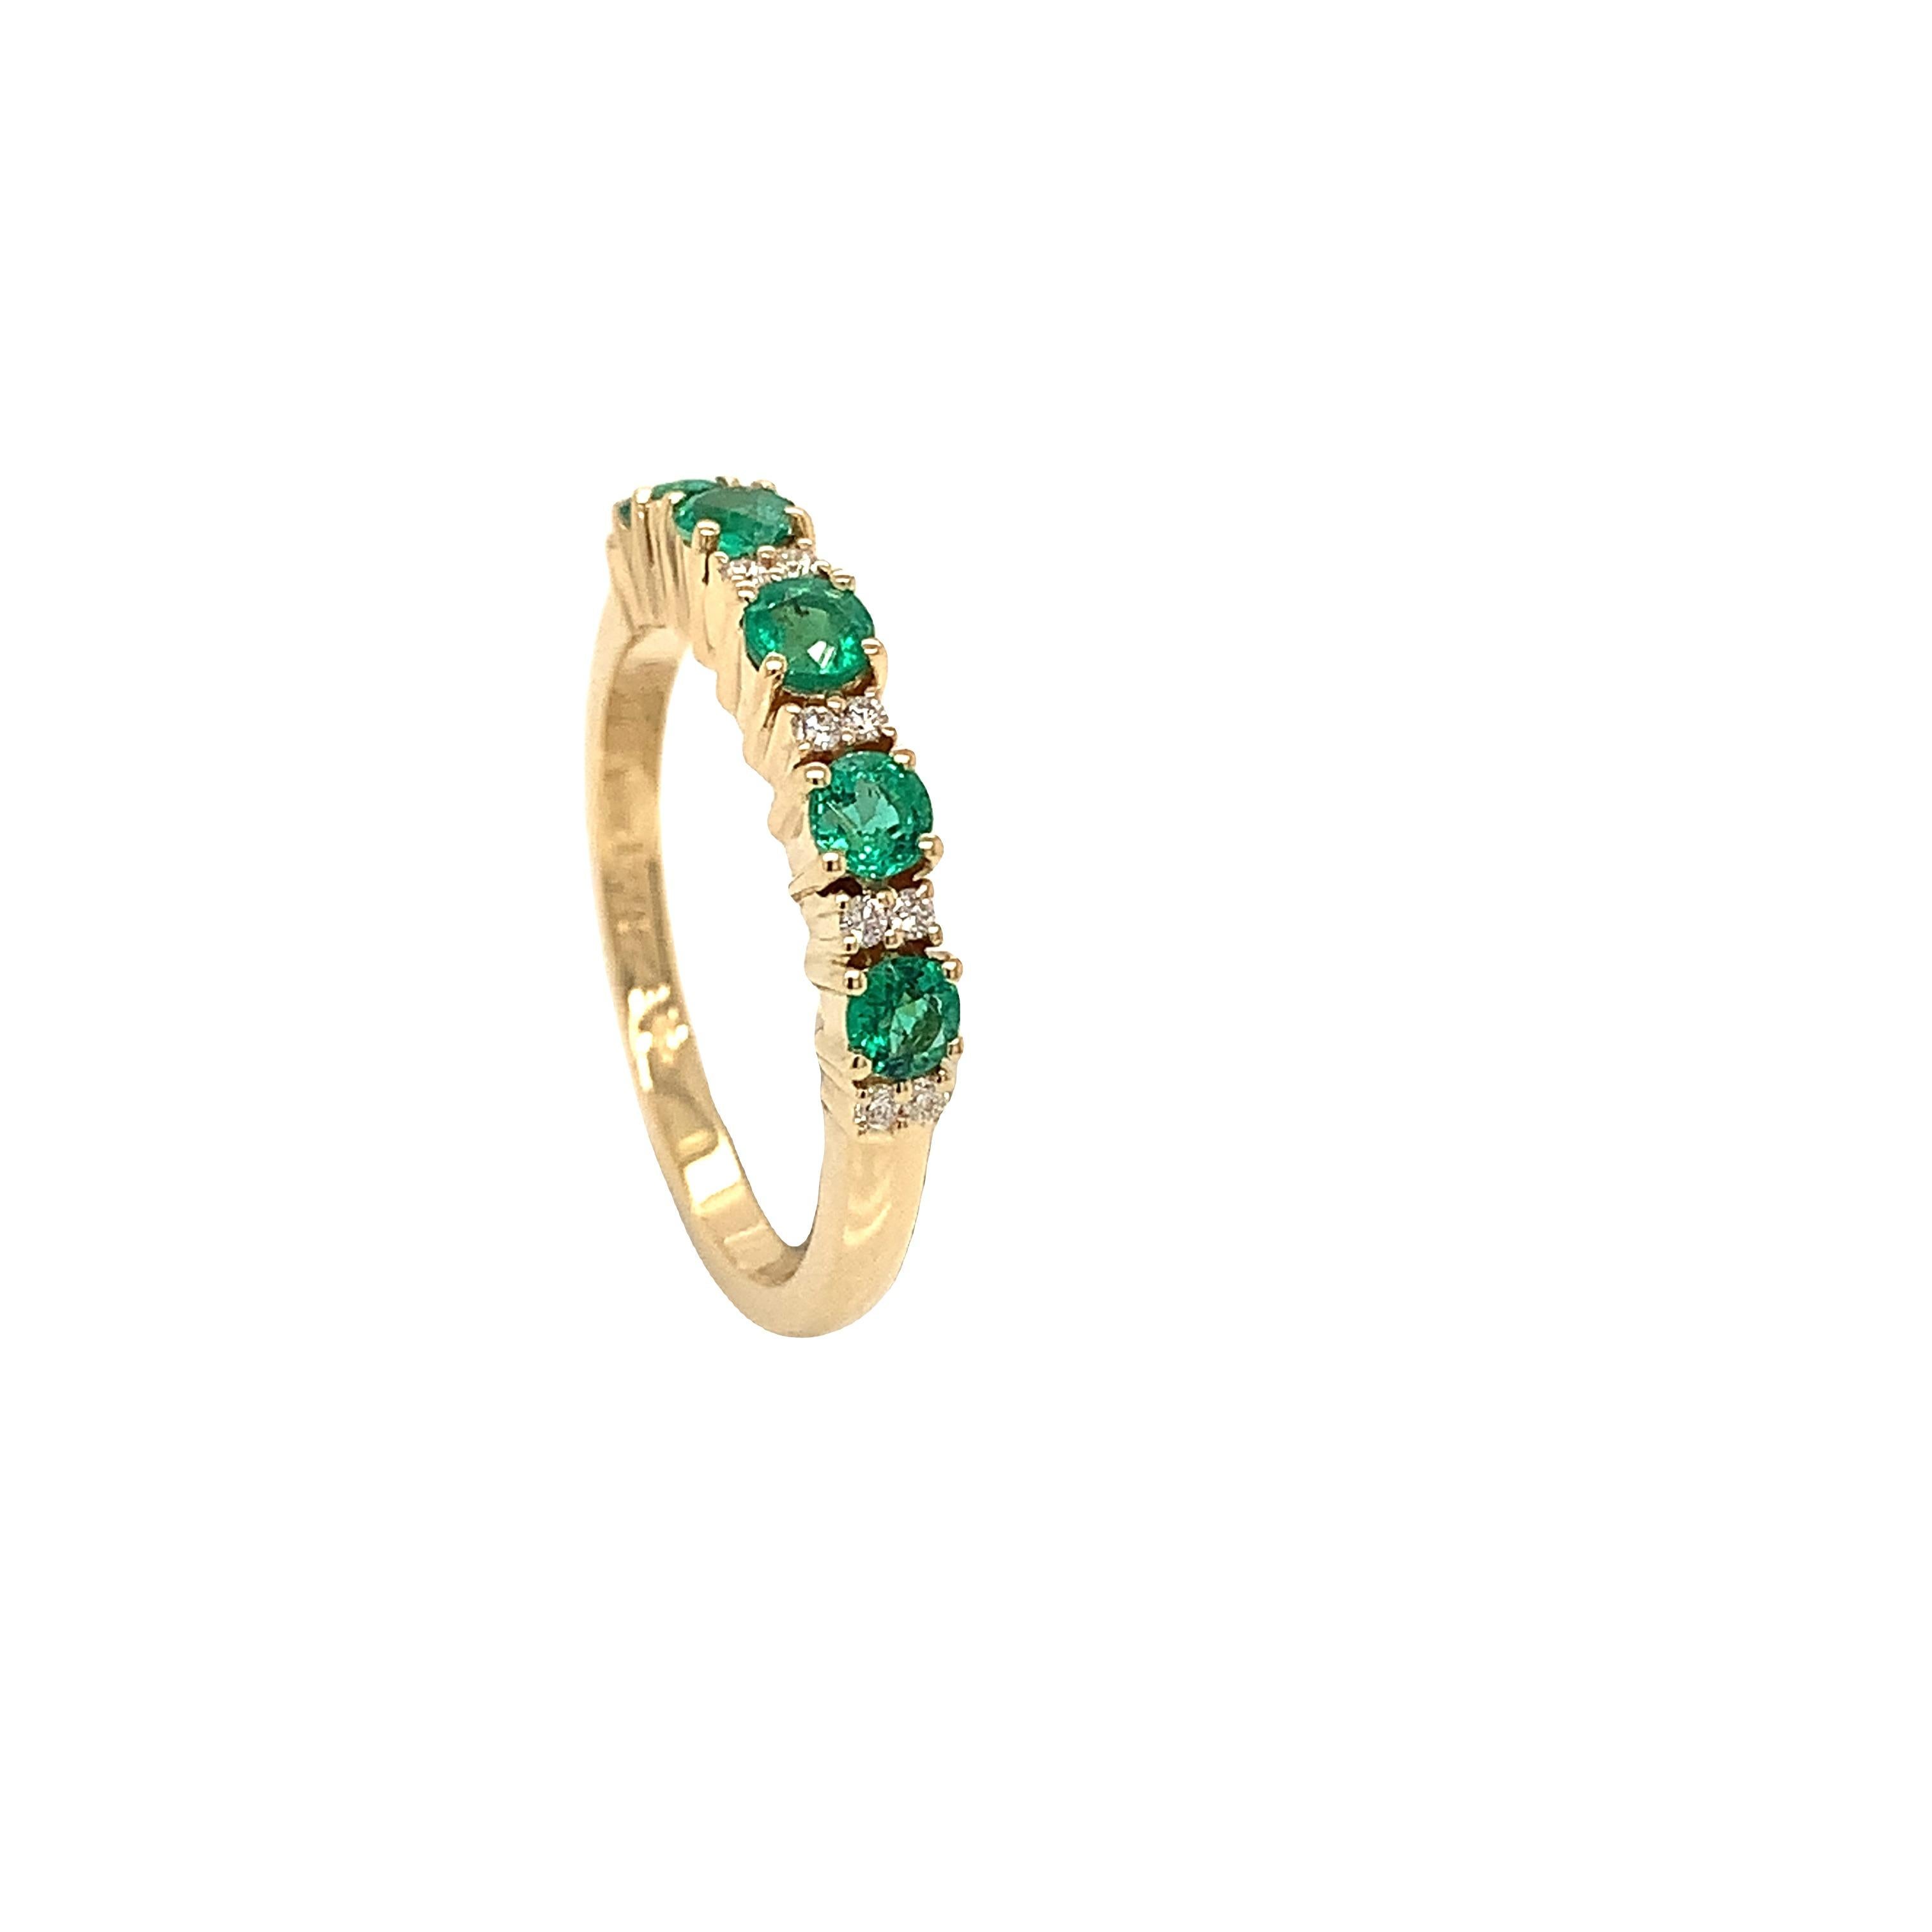 18 Karat Yellow Gold Emeralds and  White Diamonds Garavelli  Eternity Band Ring set on the top half with 7 stones
Made In Italy 
18kt GOLD gr  : 4.10
EMERALDS ct 0.58
WHITE DIAMONDS ct 0,1
Also available in all white diamonds, or different colors . 